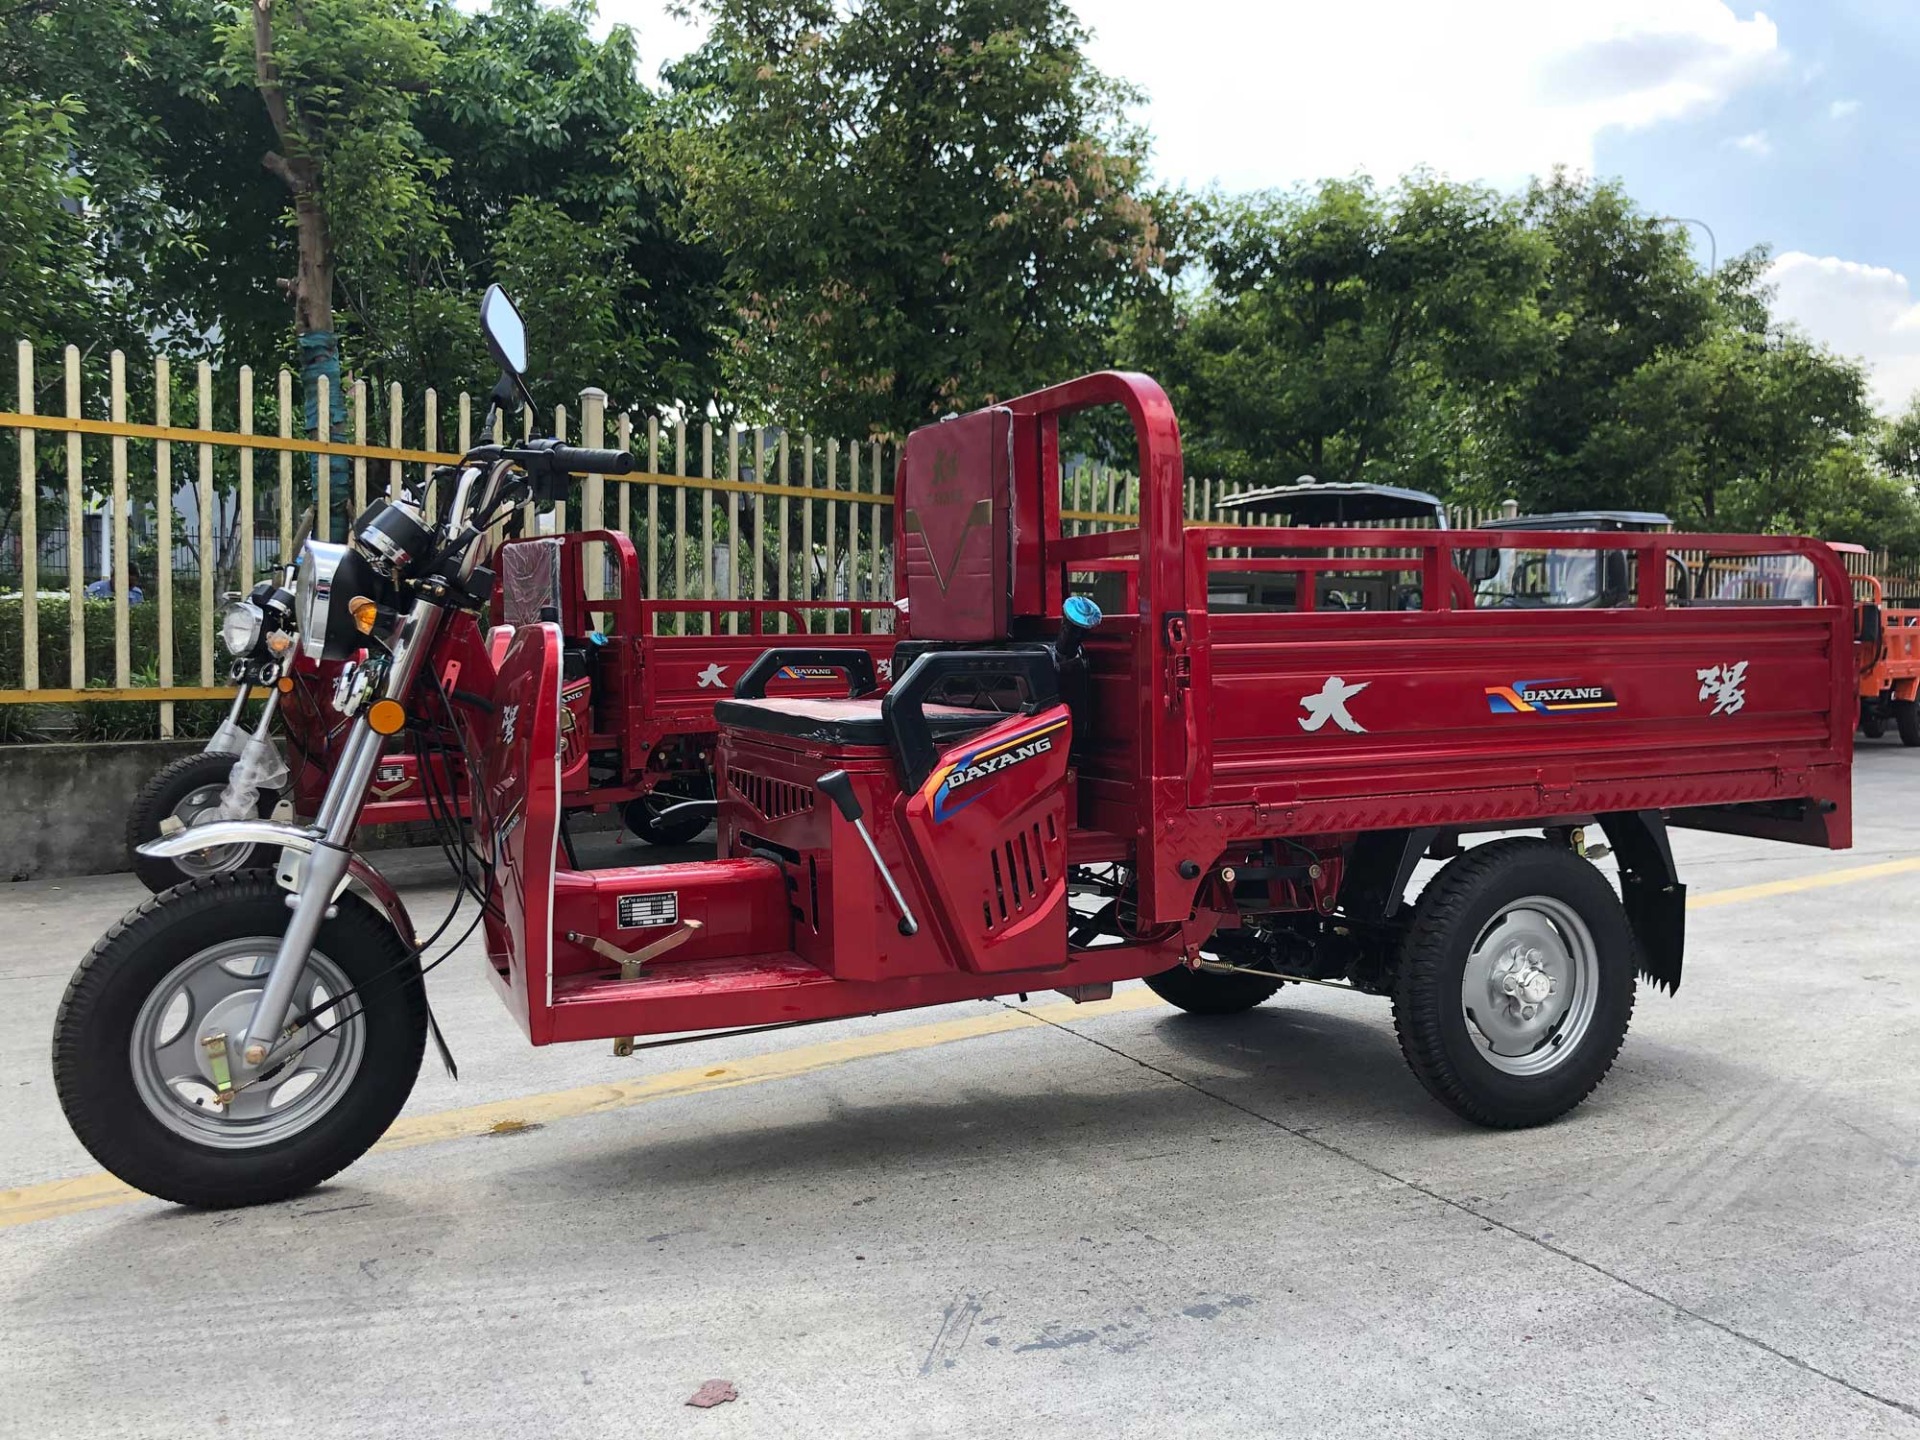 DAYANG Motorized Passenger Tricycle 3 Wheel Motorcycle 201-250cc 201 - 250cc Air-cooling Engine Gasoline Open Type for Global